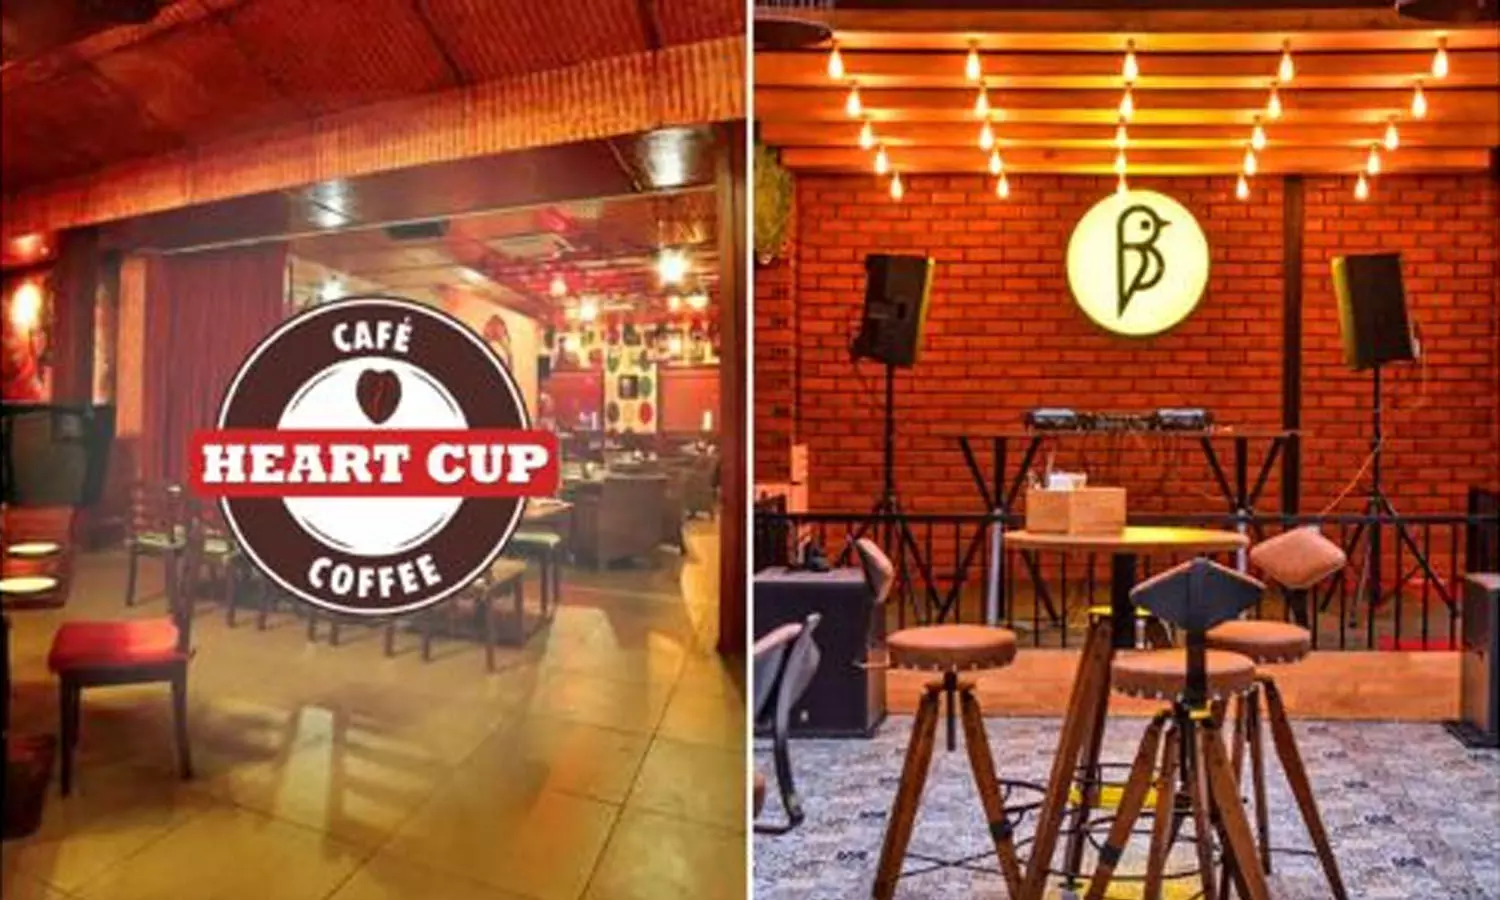 Heart Cup, Bird Box pub-owners arrested by Cyberabad police for breaking law